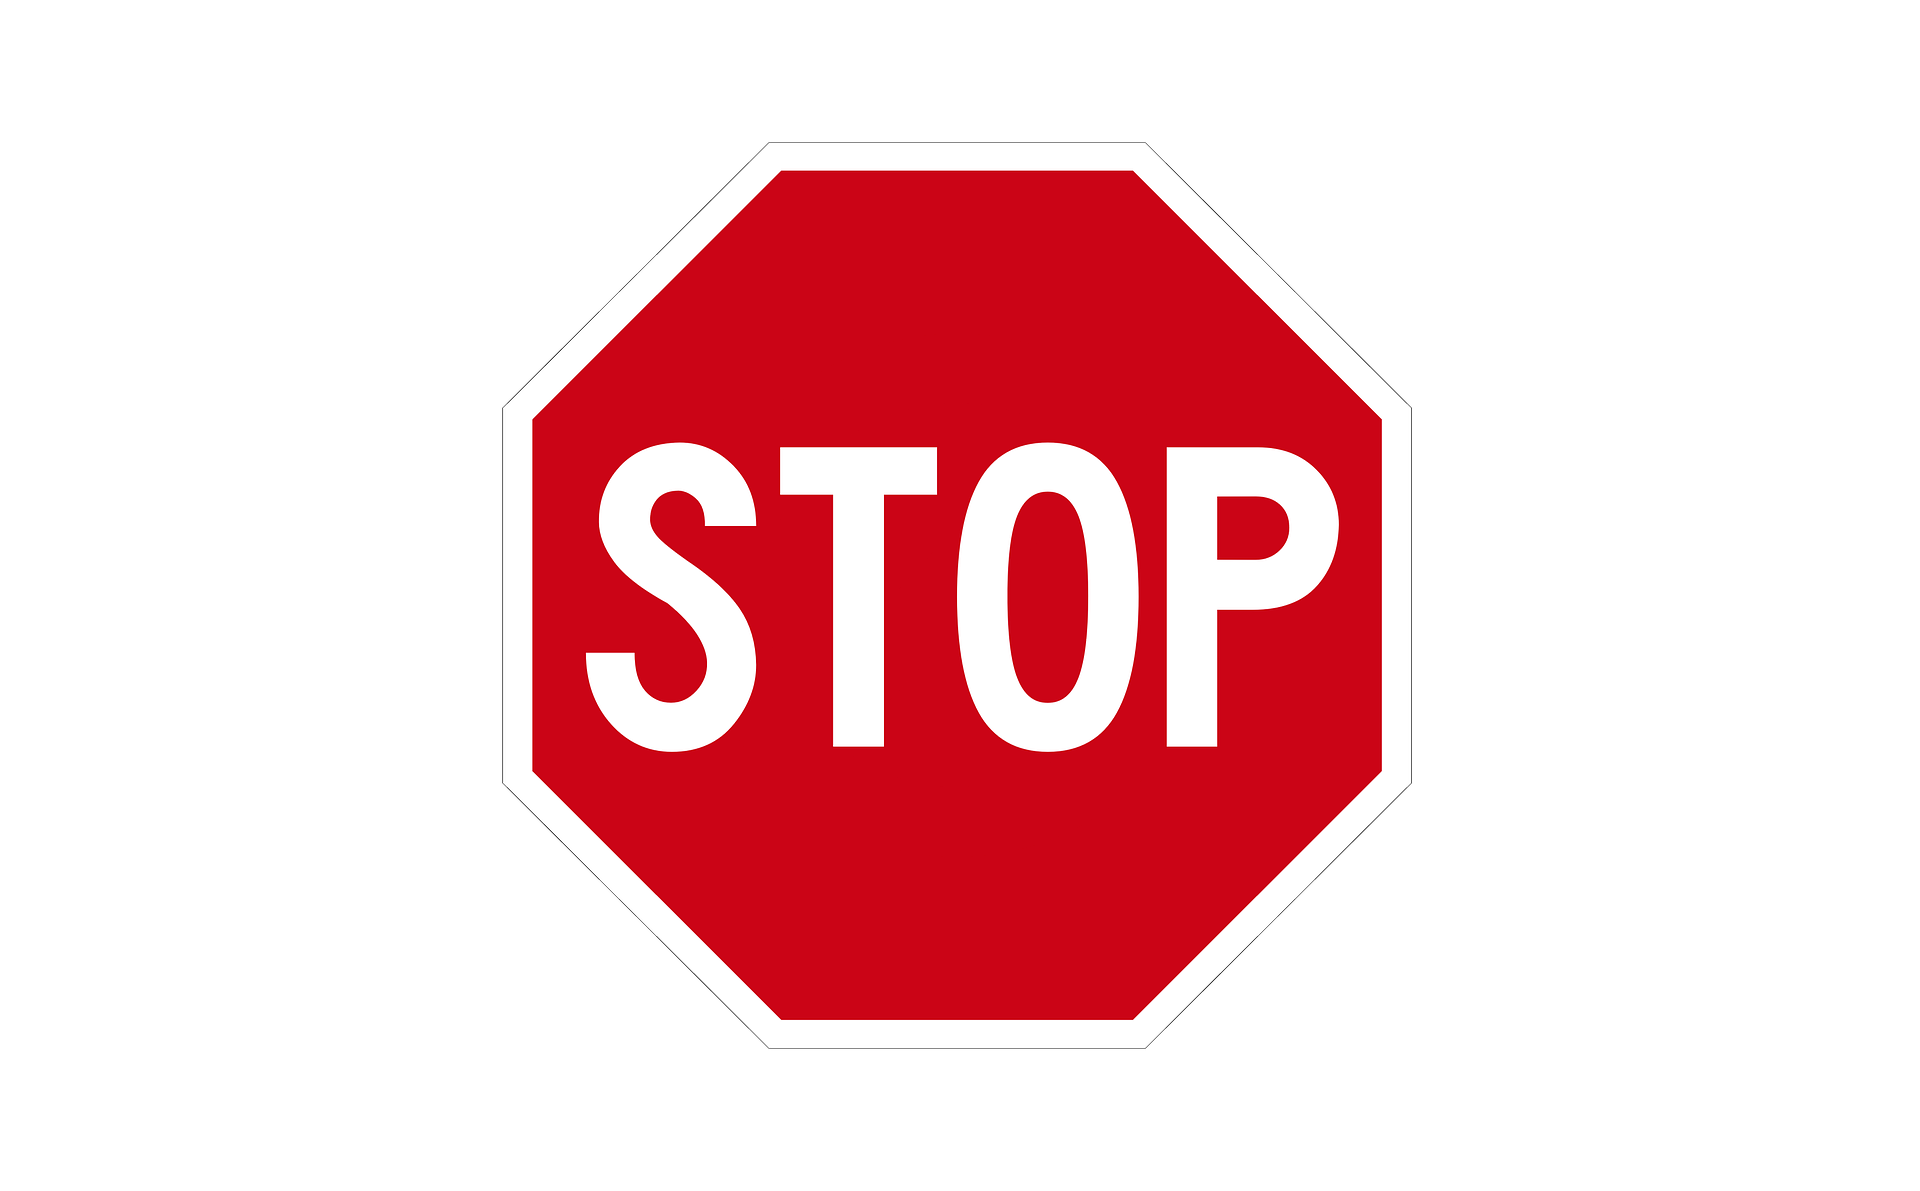 Stop sign with white letters on red background